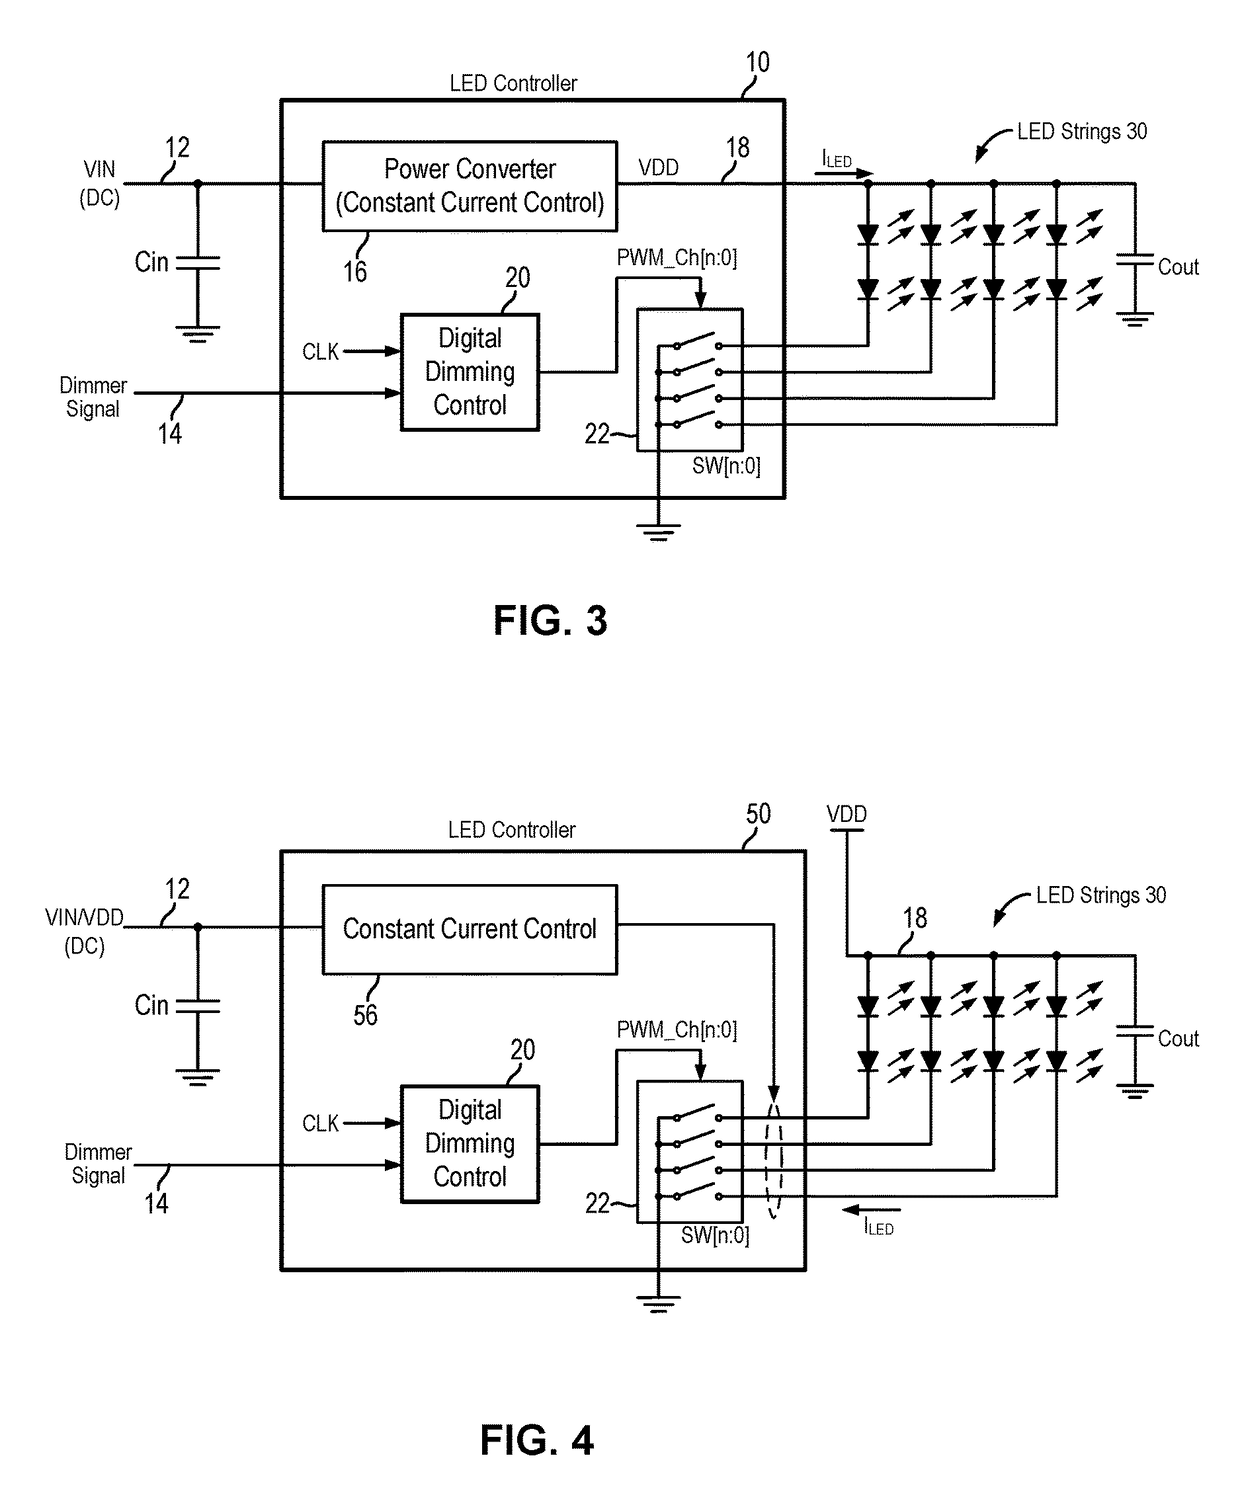 Audible noise reduction method for multiple LED channel systems